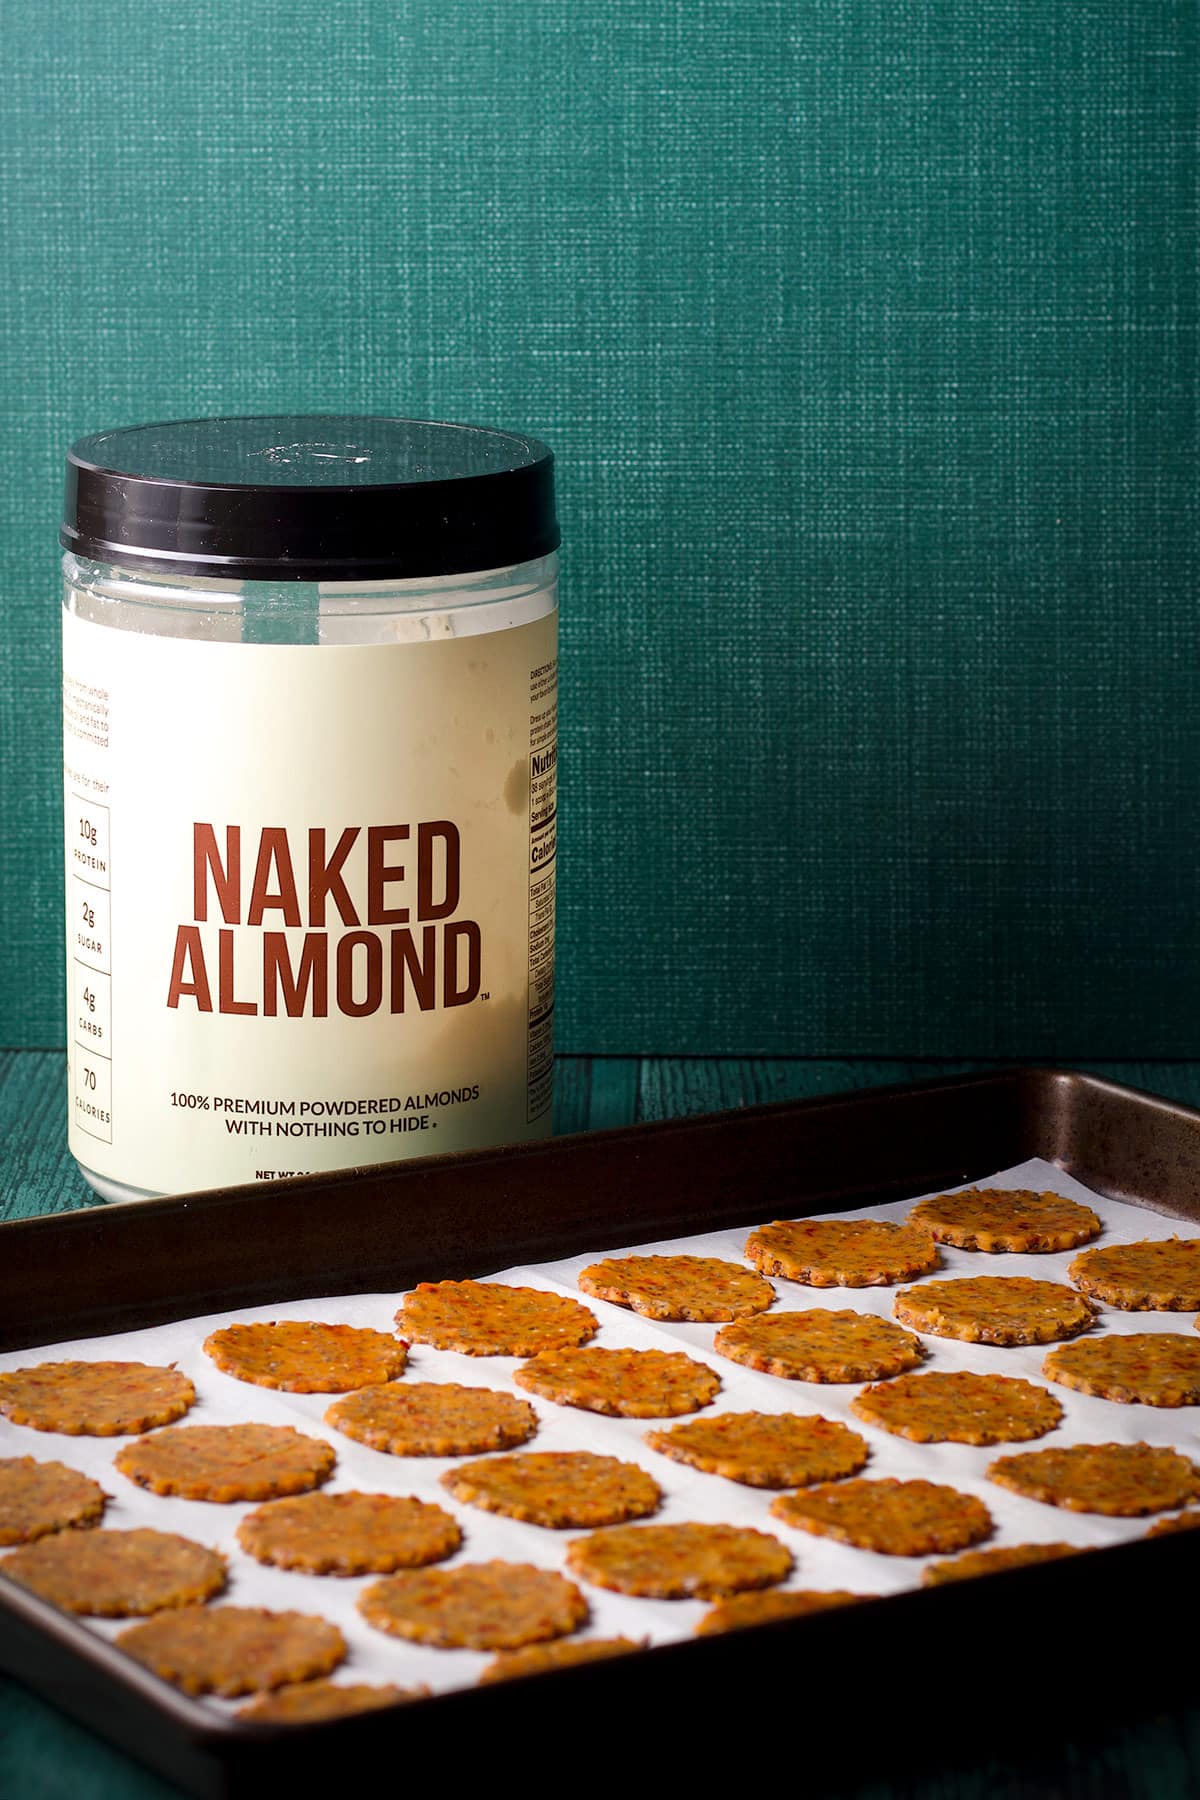 A container of Naked Almond on a table next to a tray of cut out gluten free cheese crackers that are ready to bake.